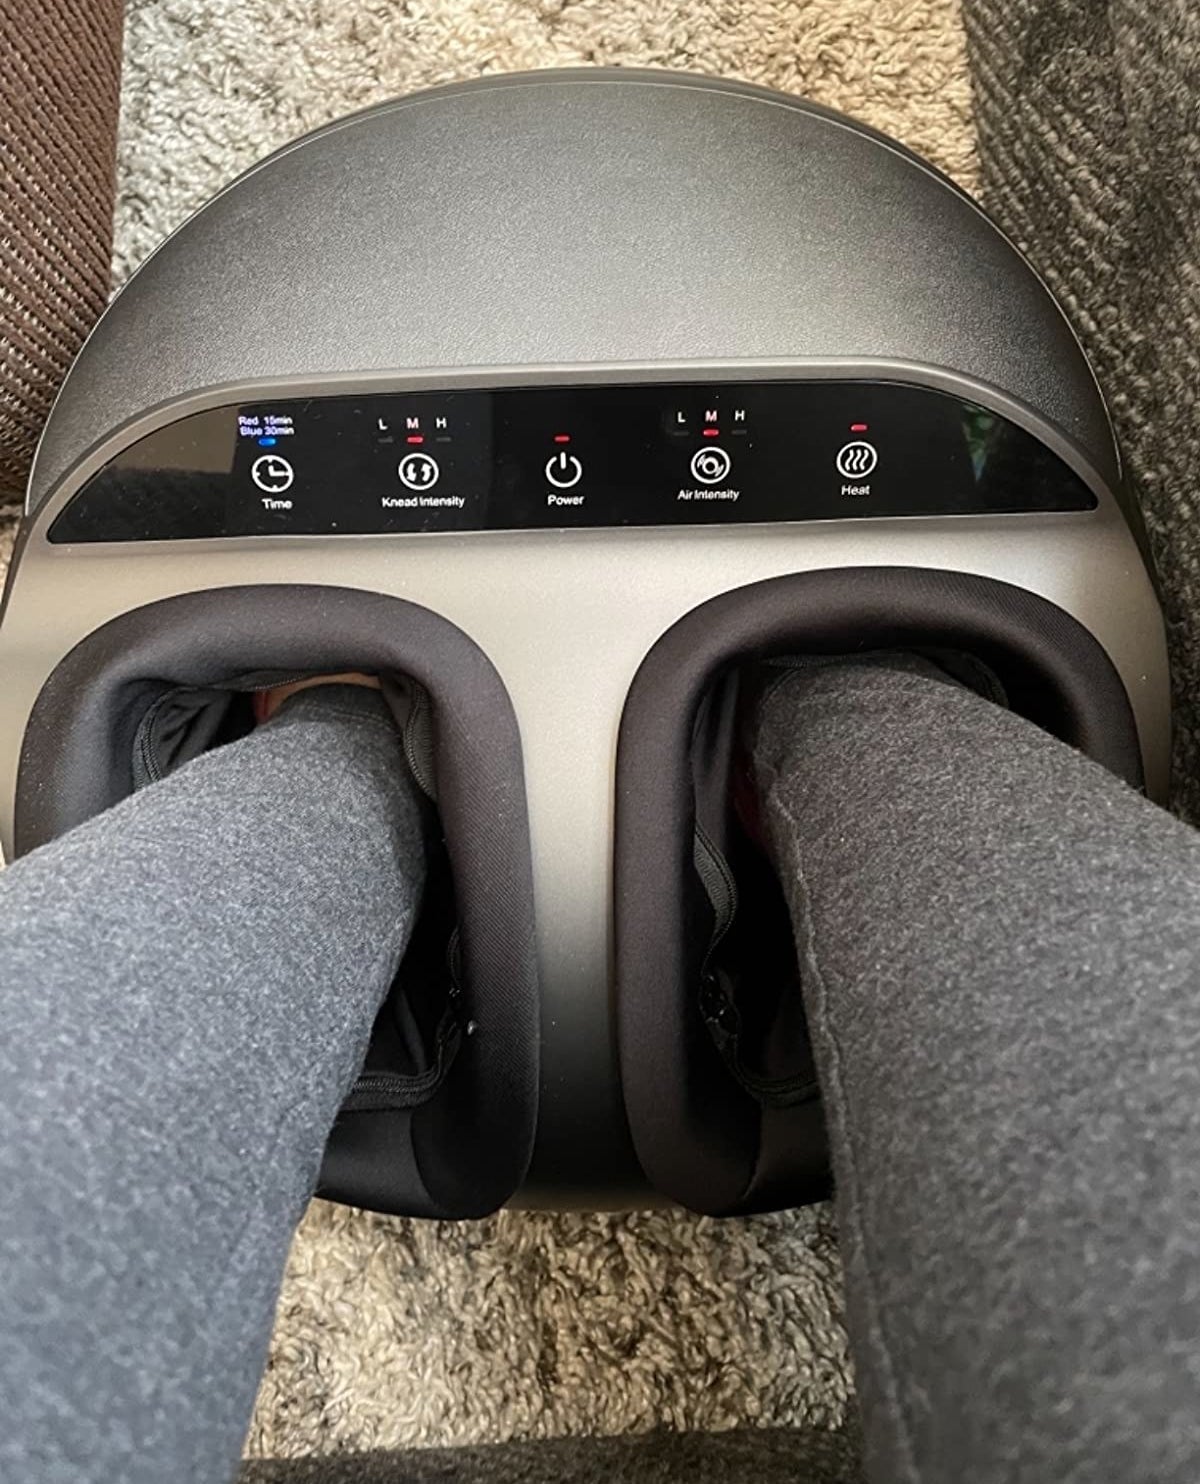 Reviewer using the foot massager